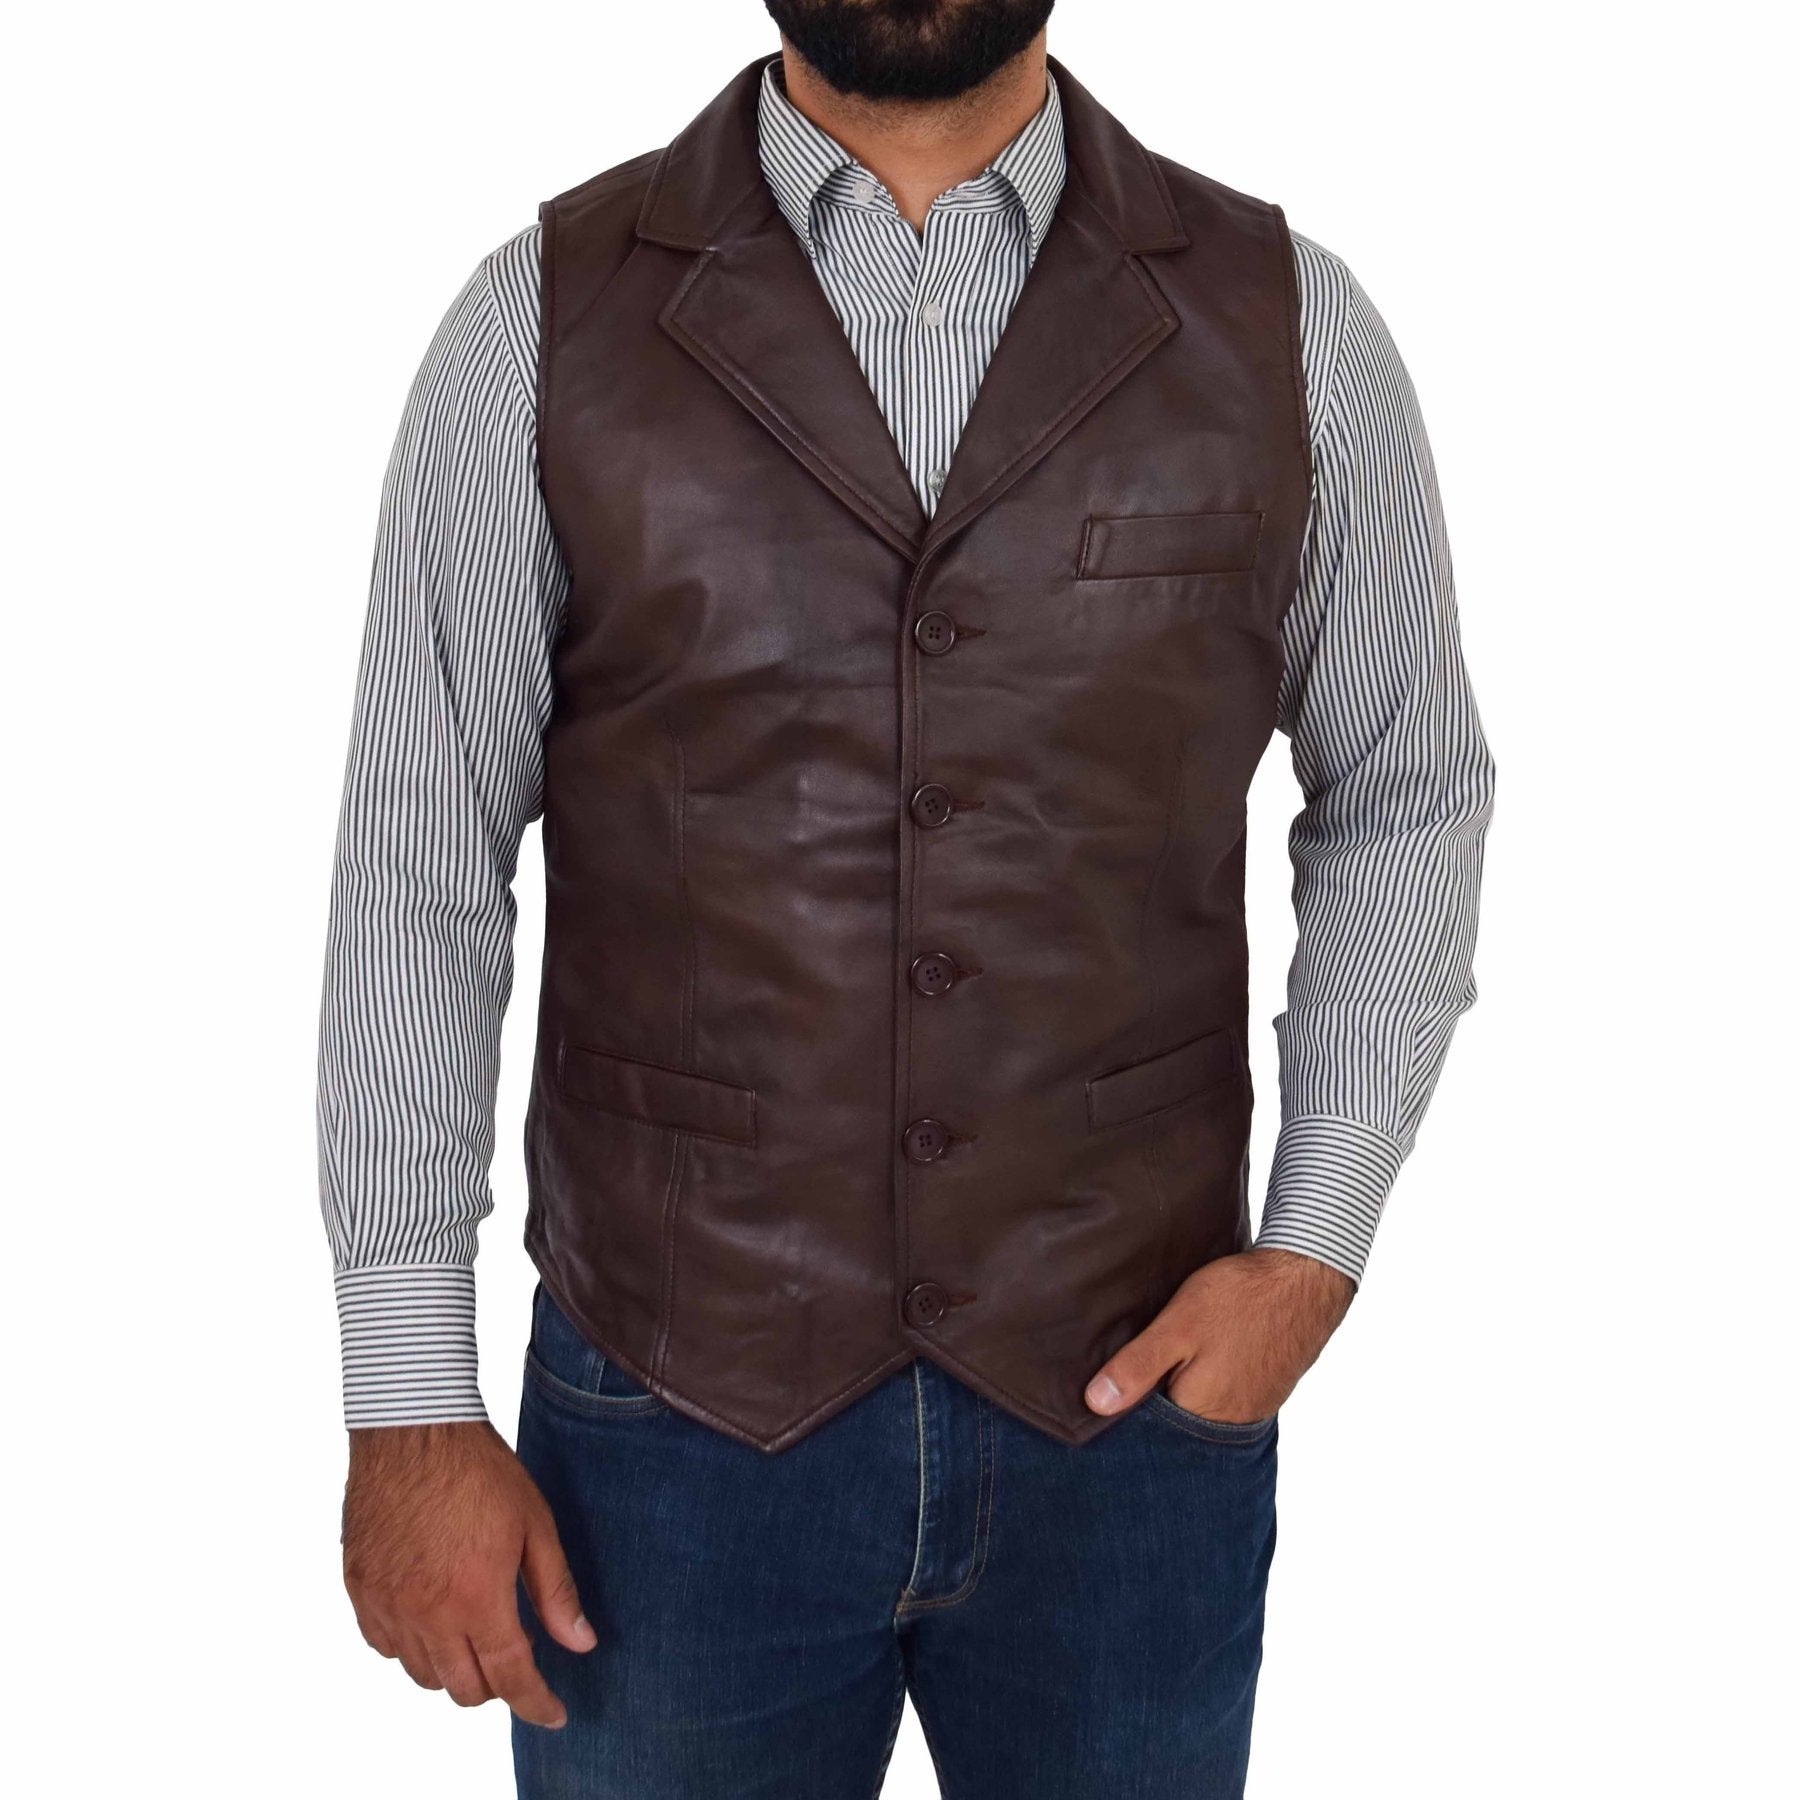 Spine Spark Men's Motorbike Soft Leather Brown Classic Style Vest